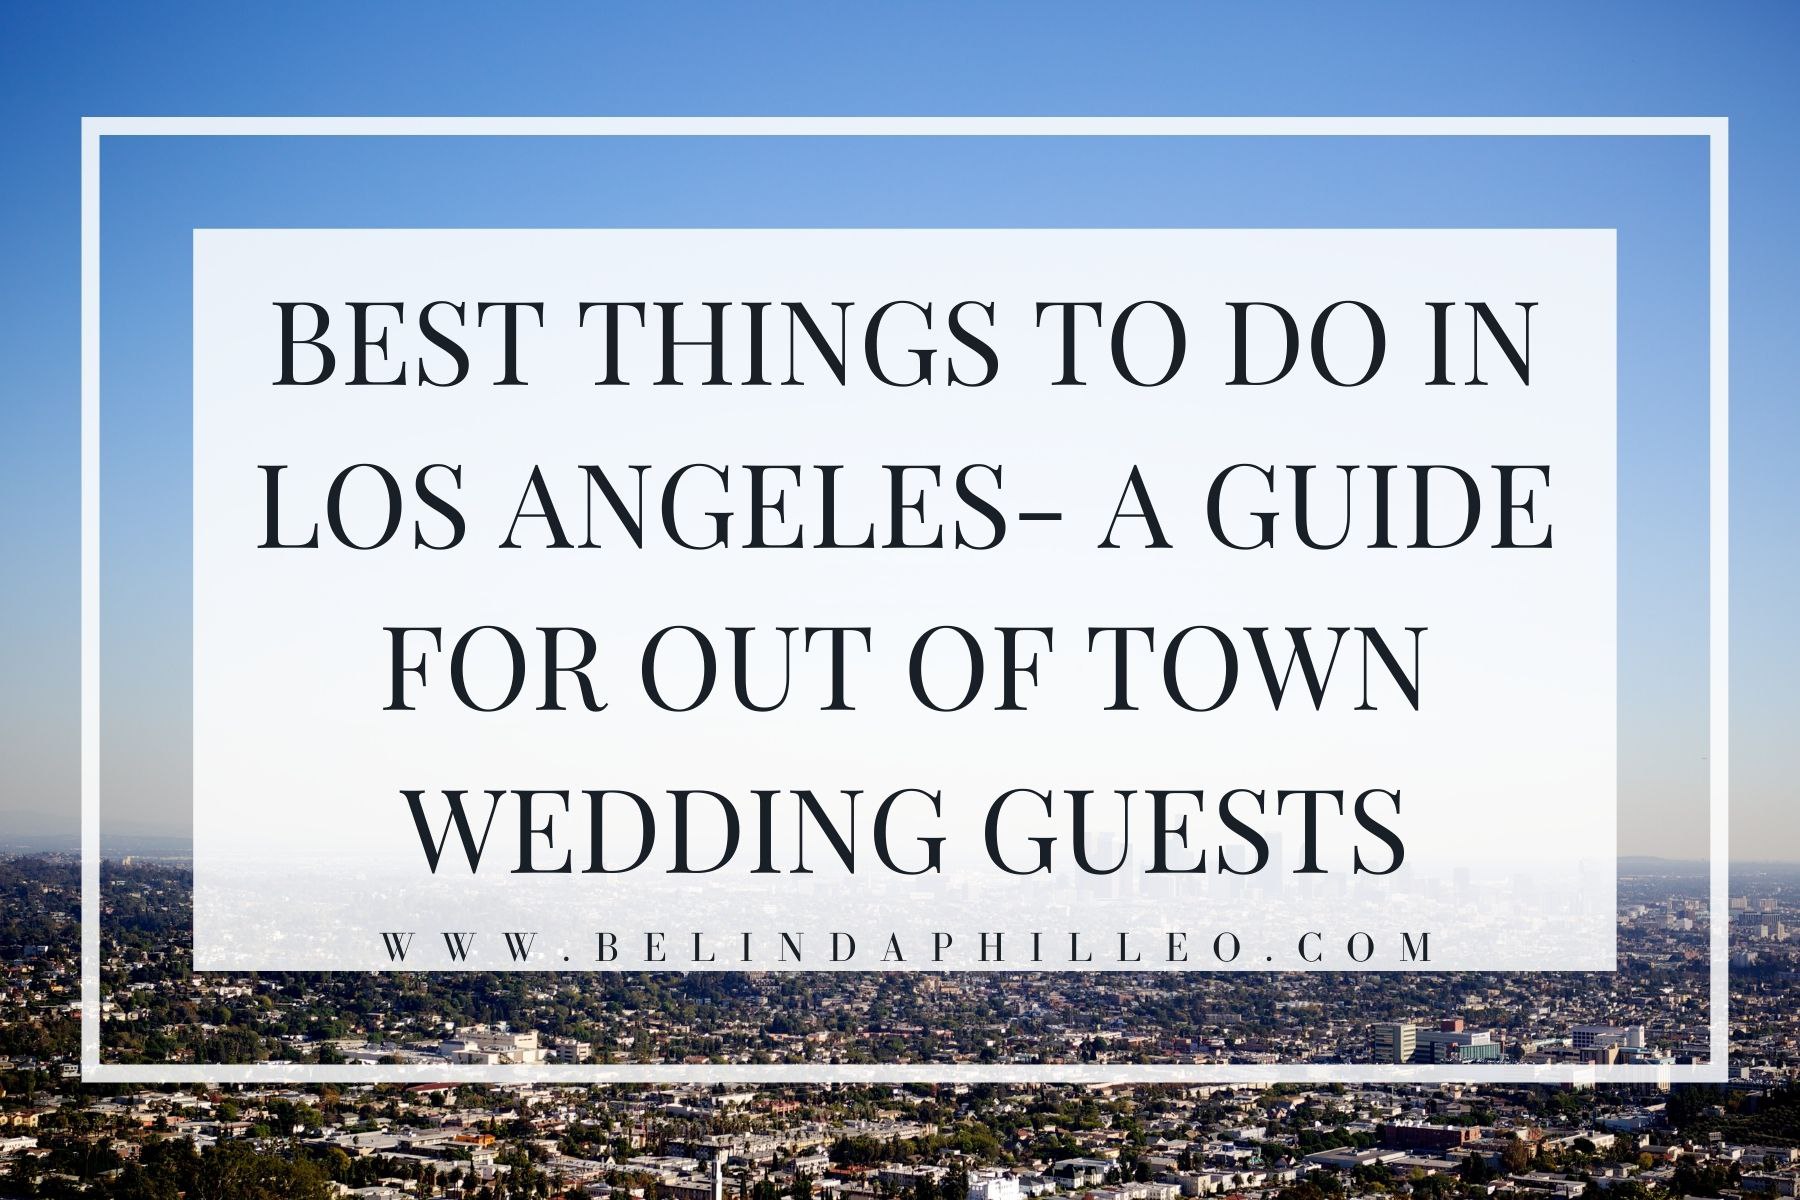 Best things to do in Los Angeles